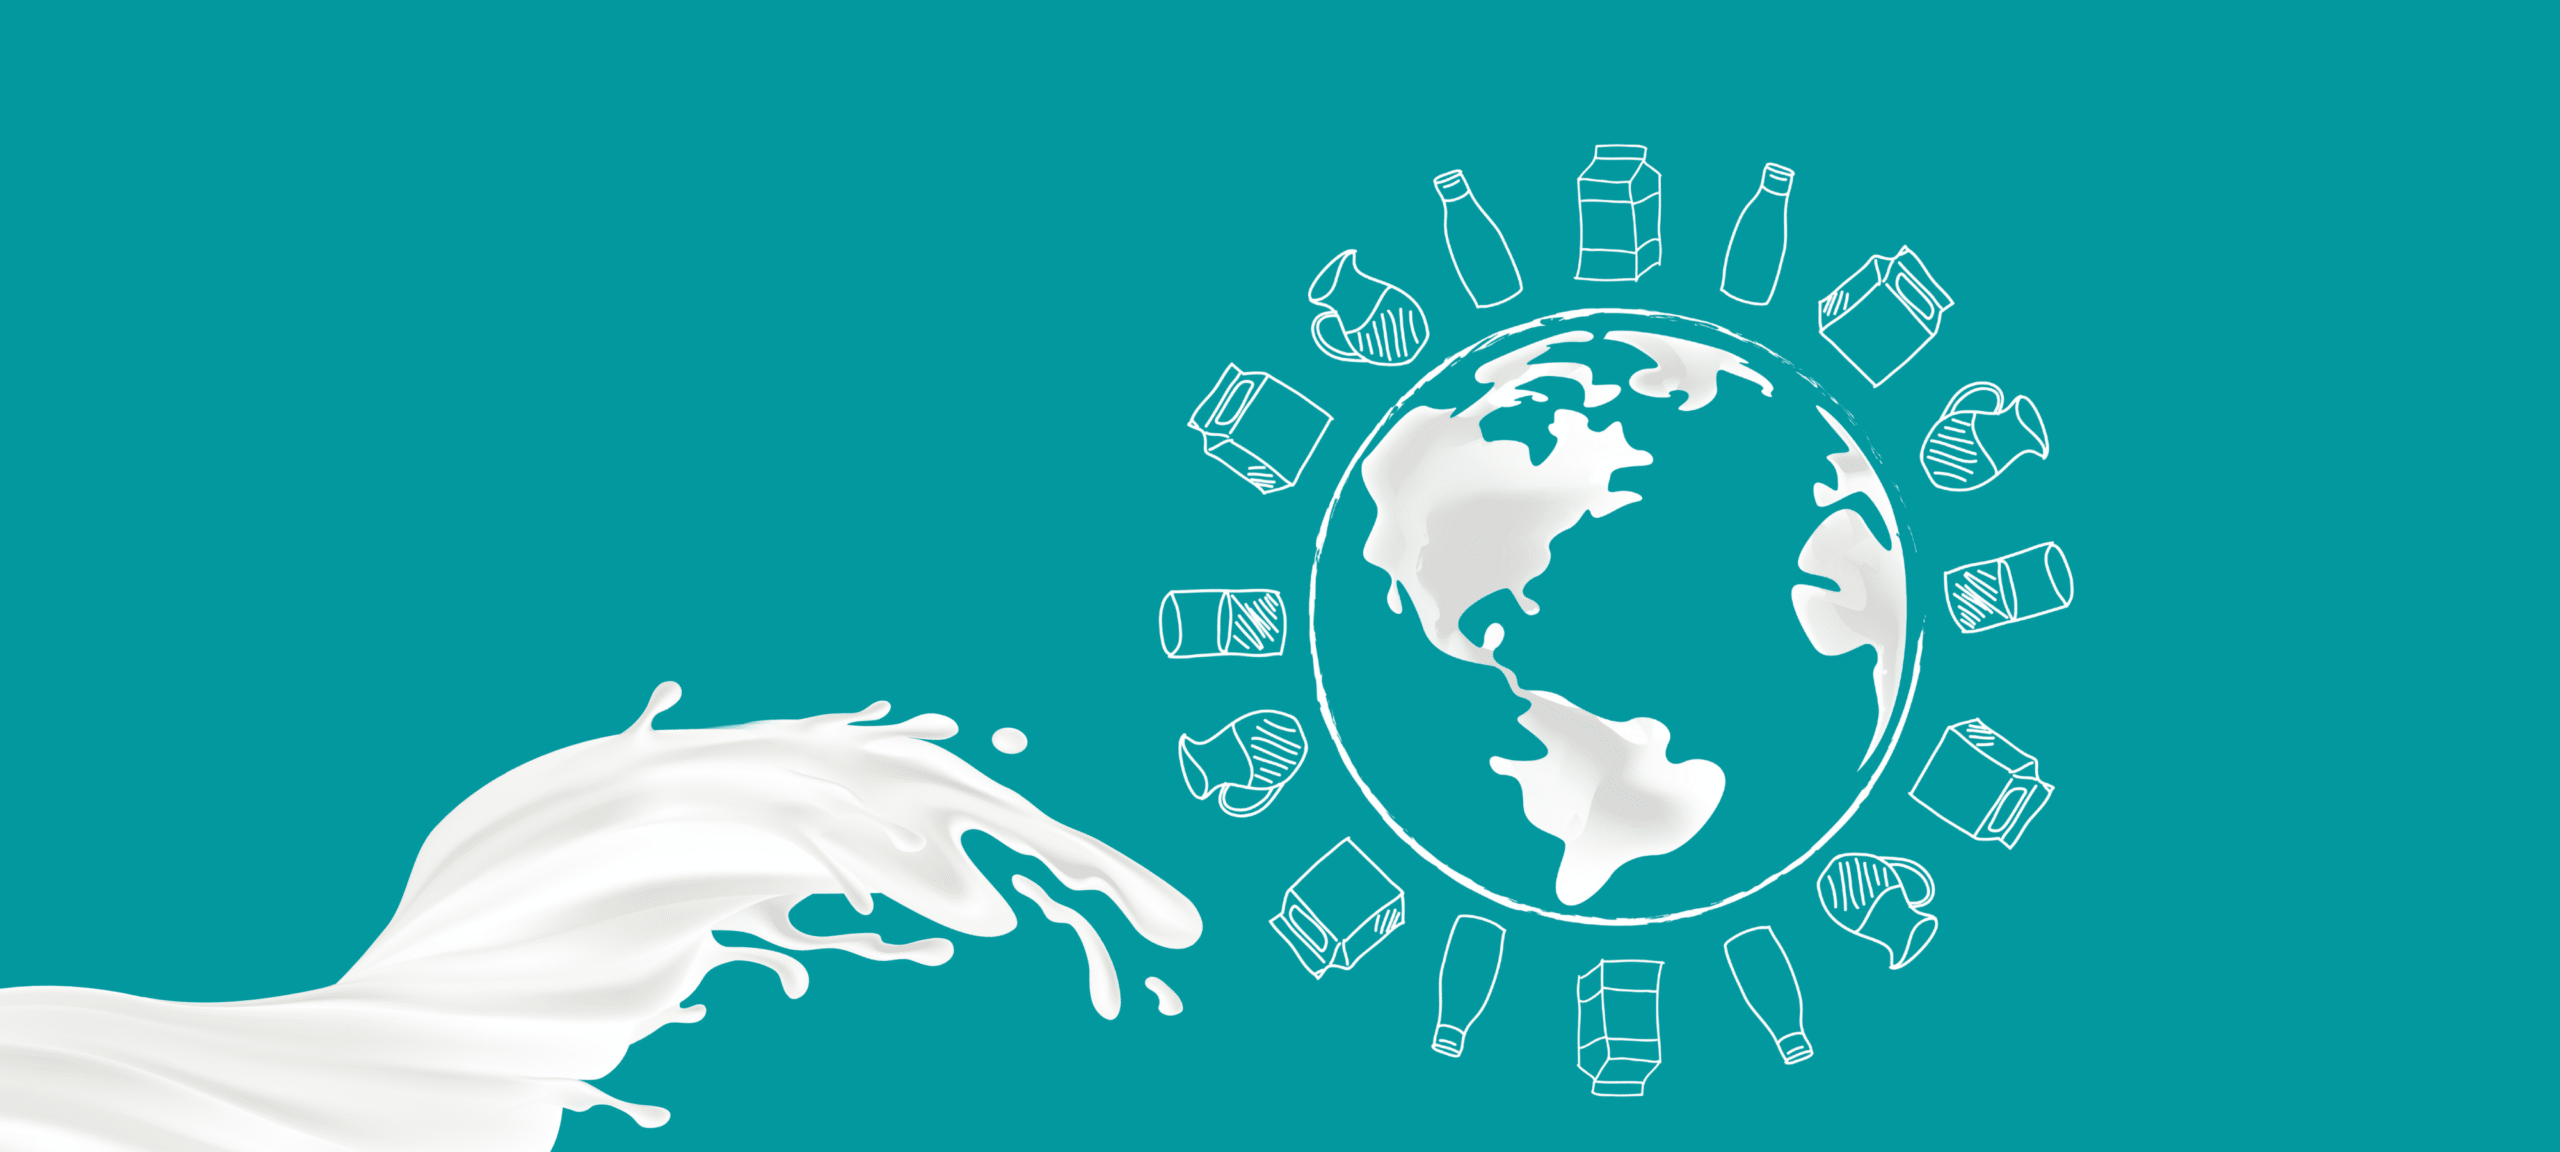 Why Dairy is a Global Leader of Sustainability